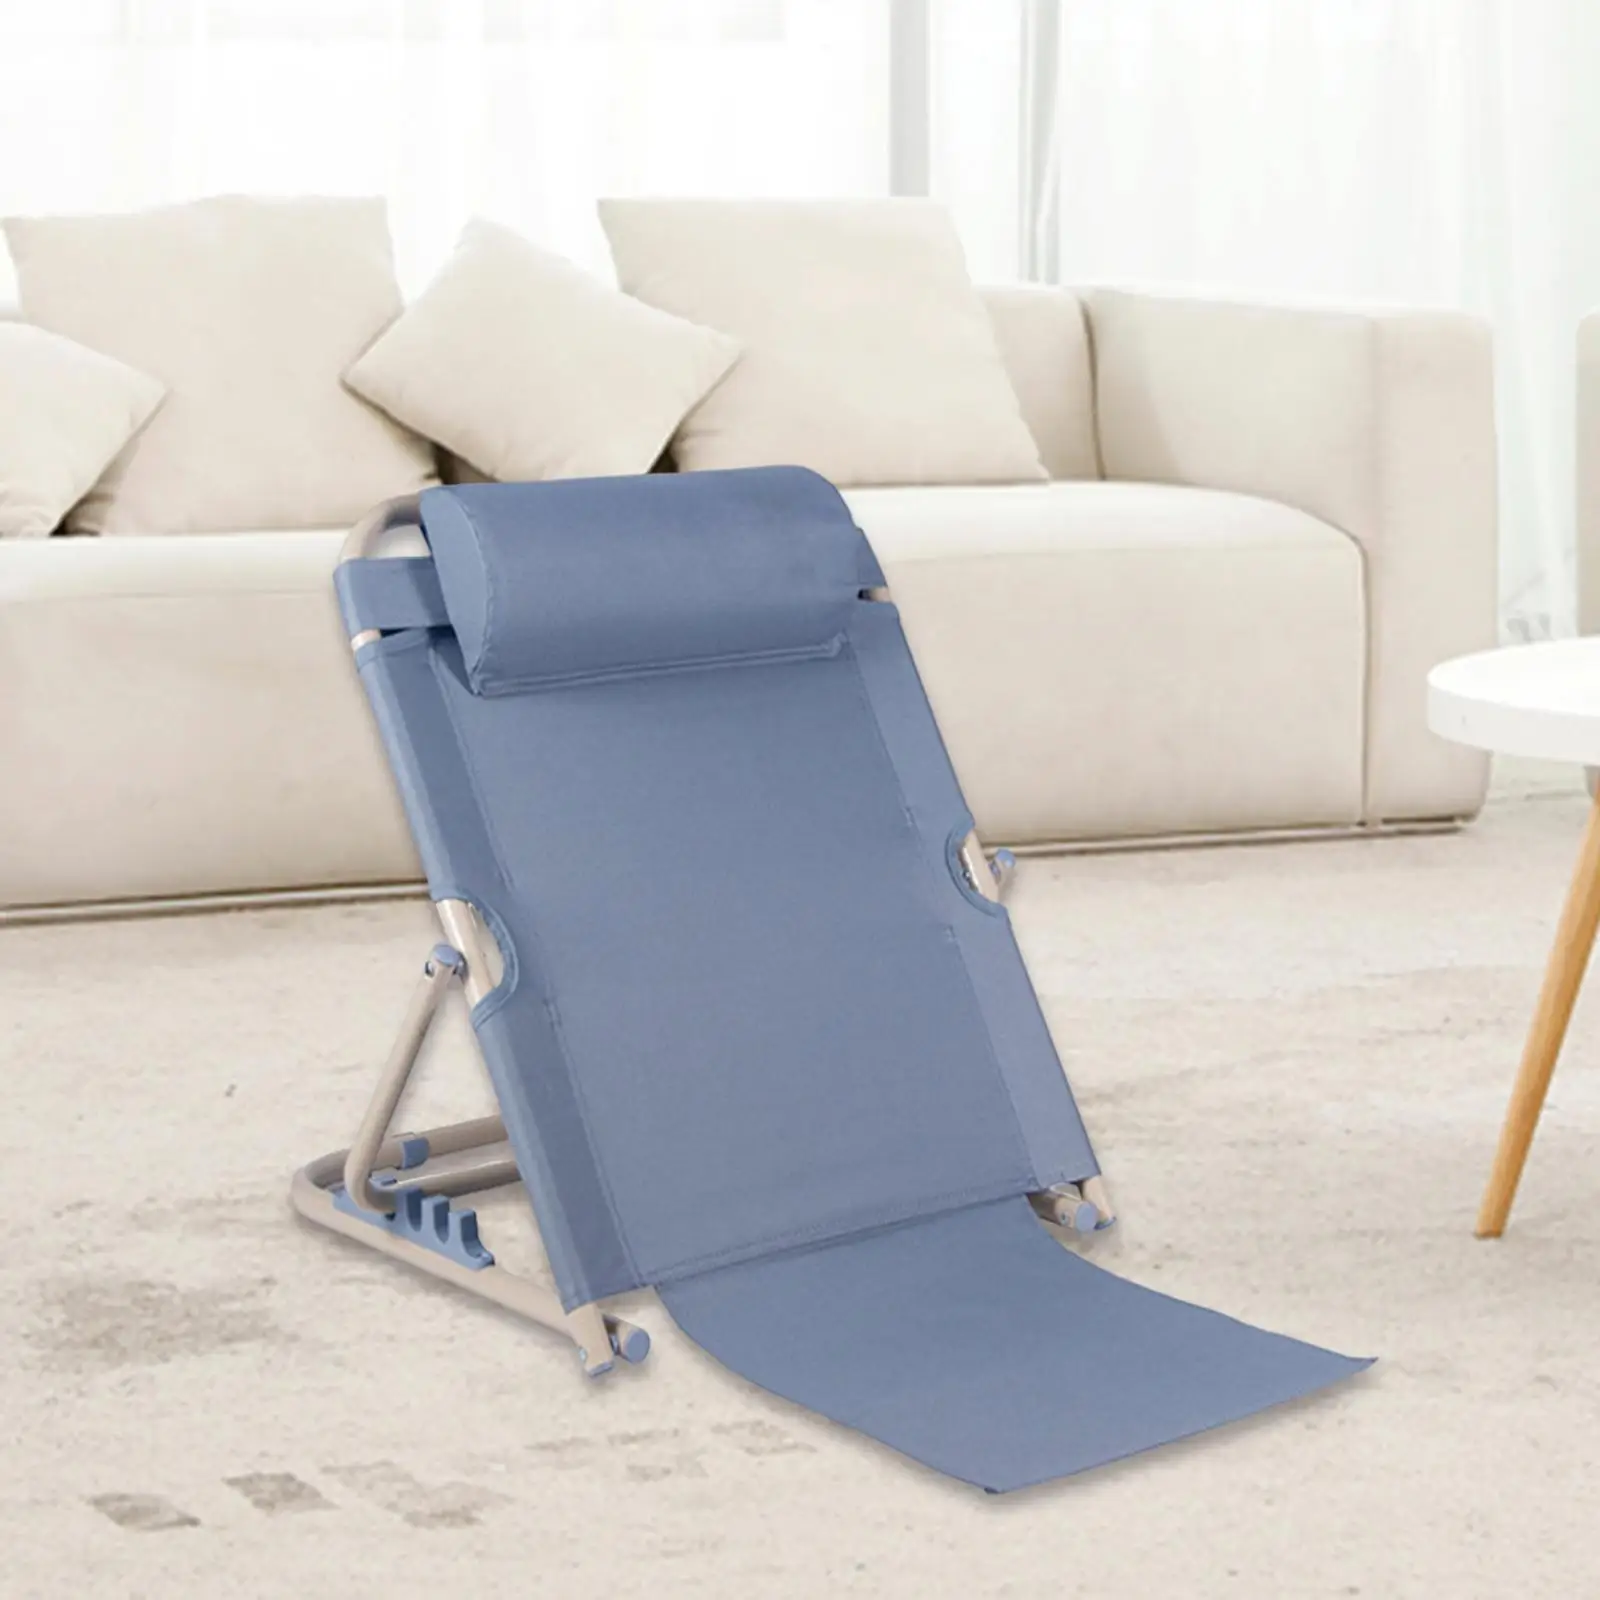 Bed Backrest Folding Adjustable Chair Portable for Adult with Head Cushion Multi Function Support Back Rest for Head Neck